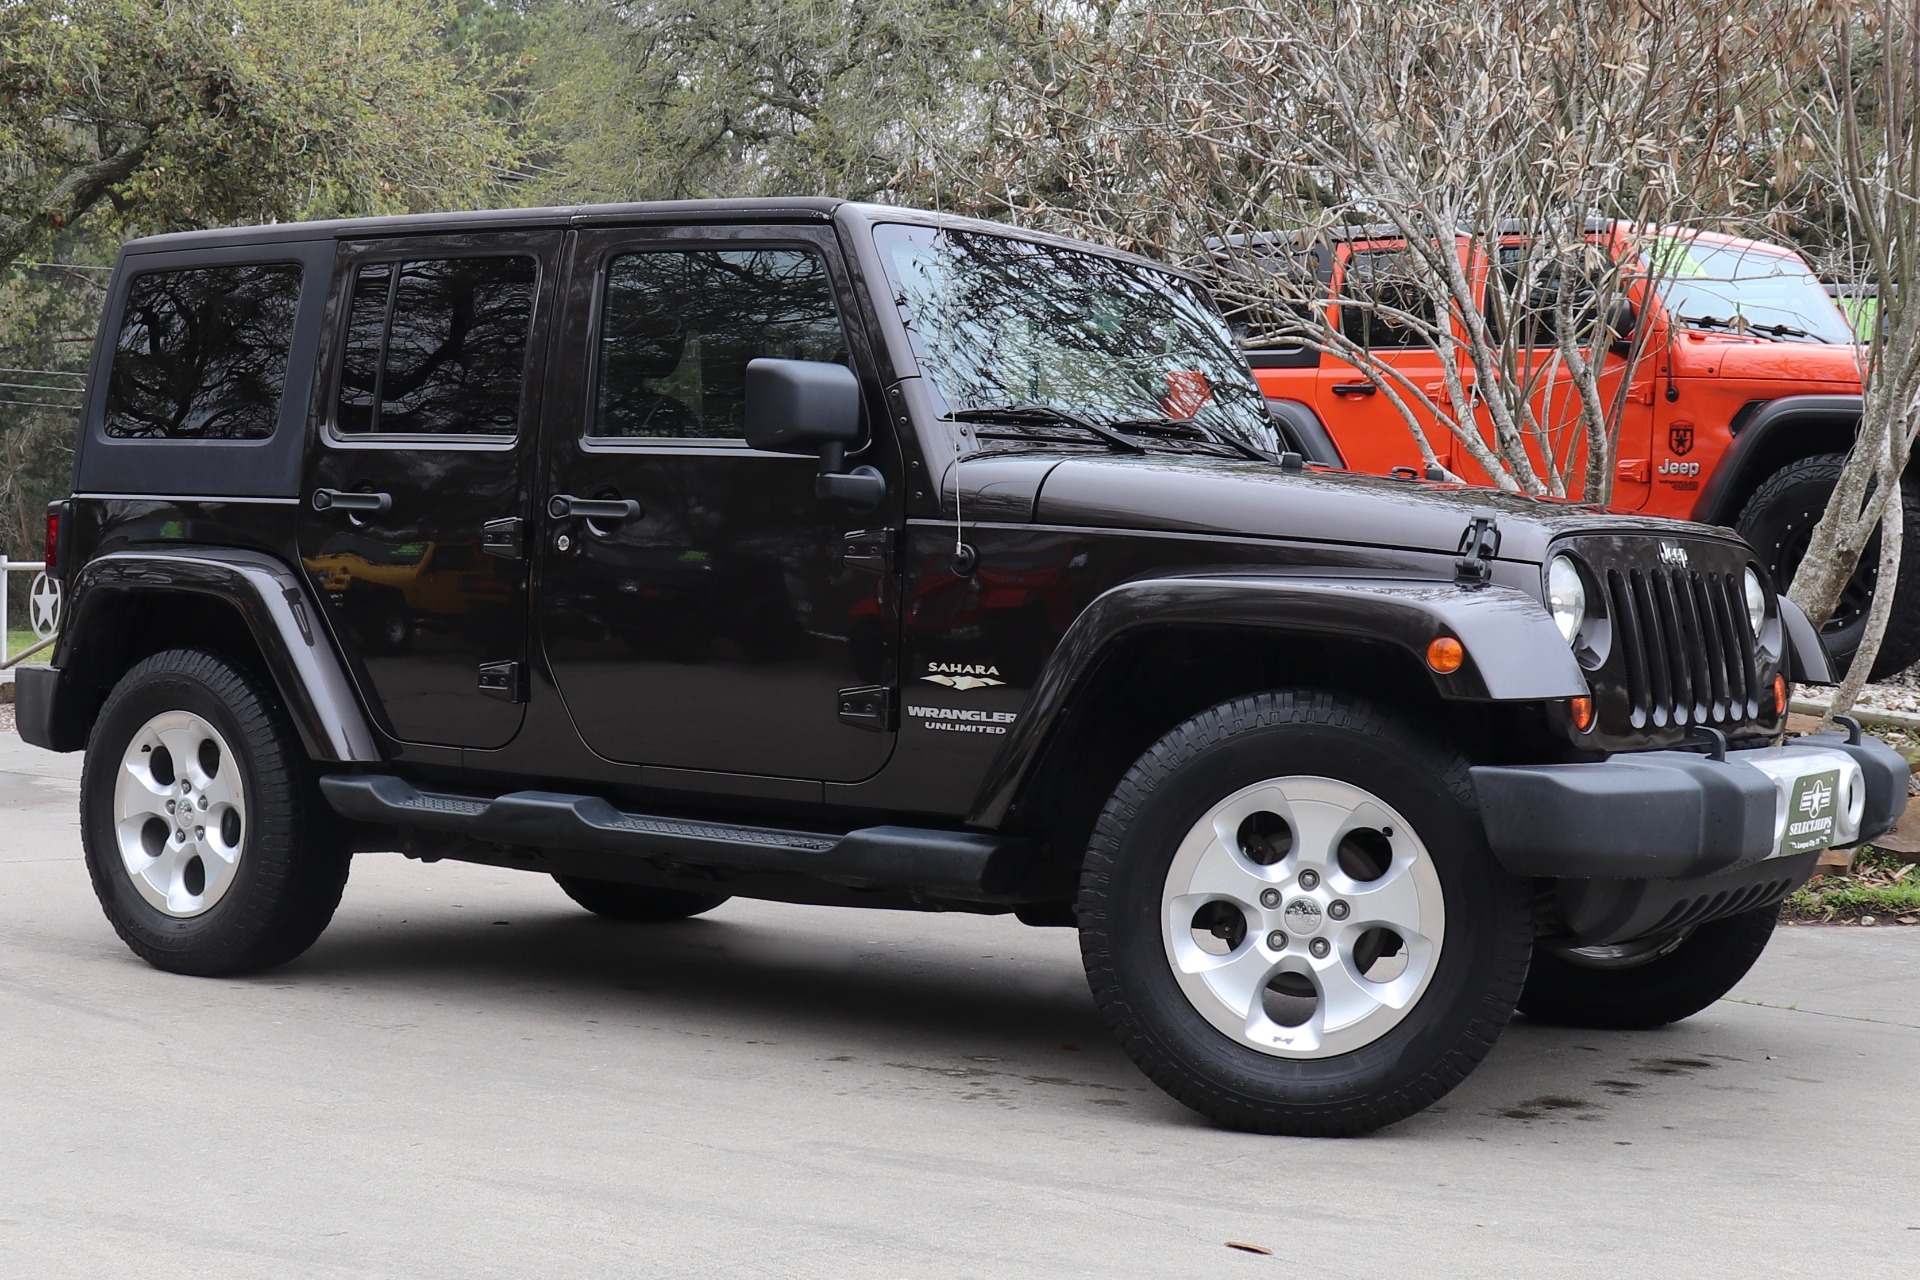 Used 2013 Jeep Wrangler Unlimited Sahara For Sale ($24,995) | Select Jeeps  Inc. Stock #685811